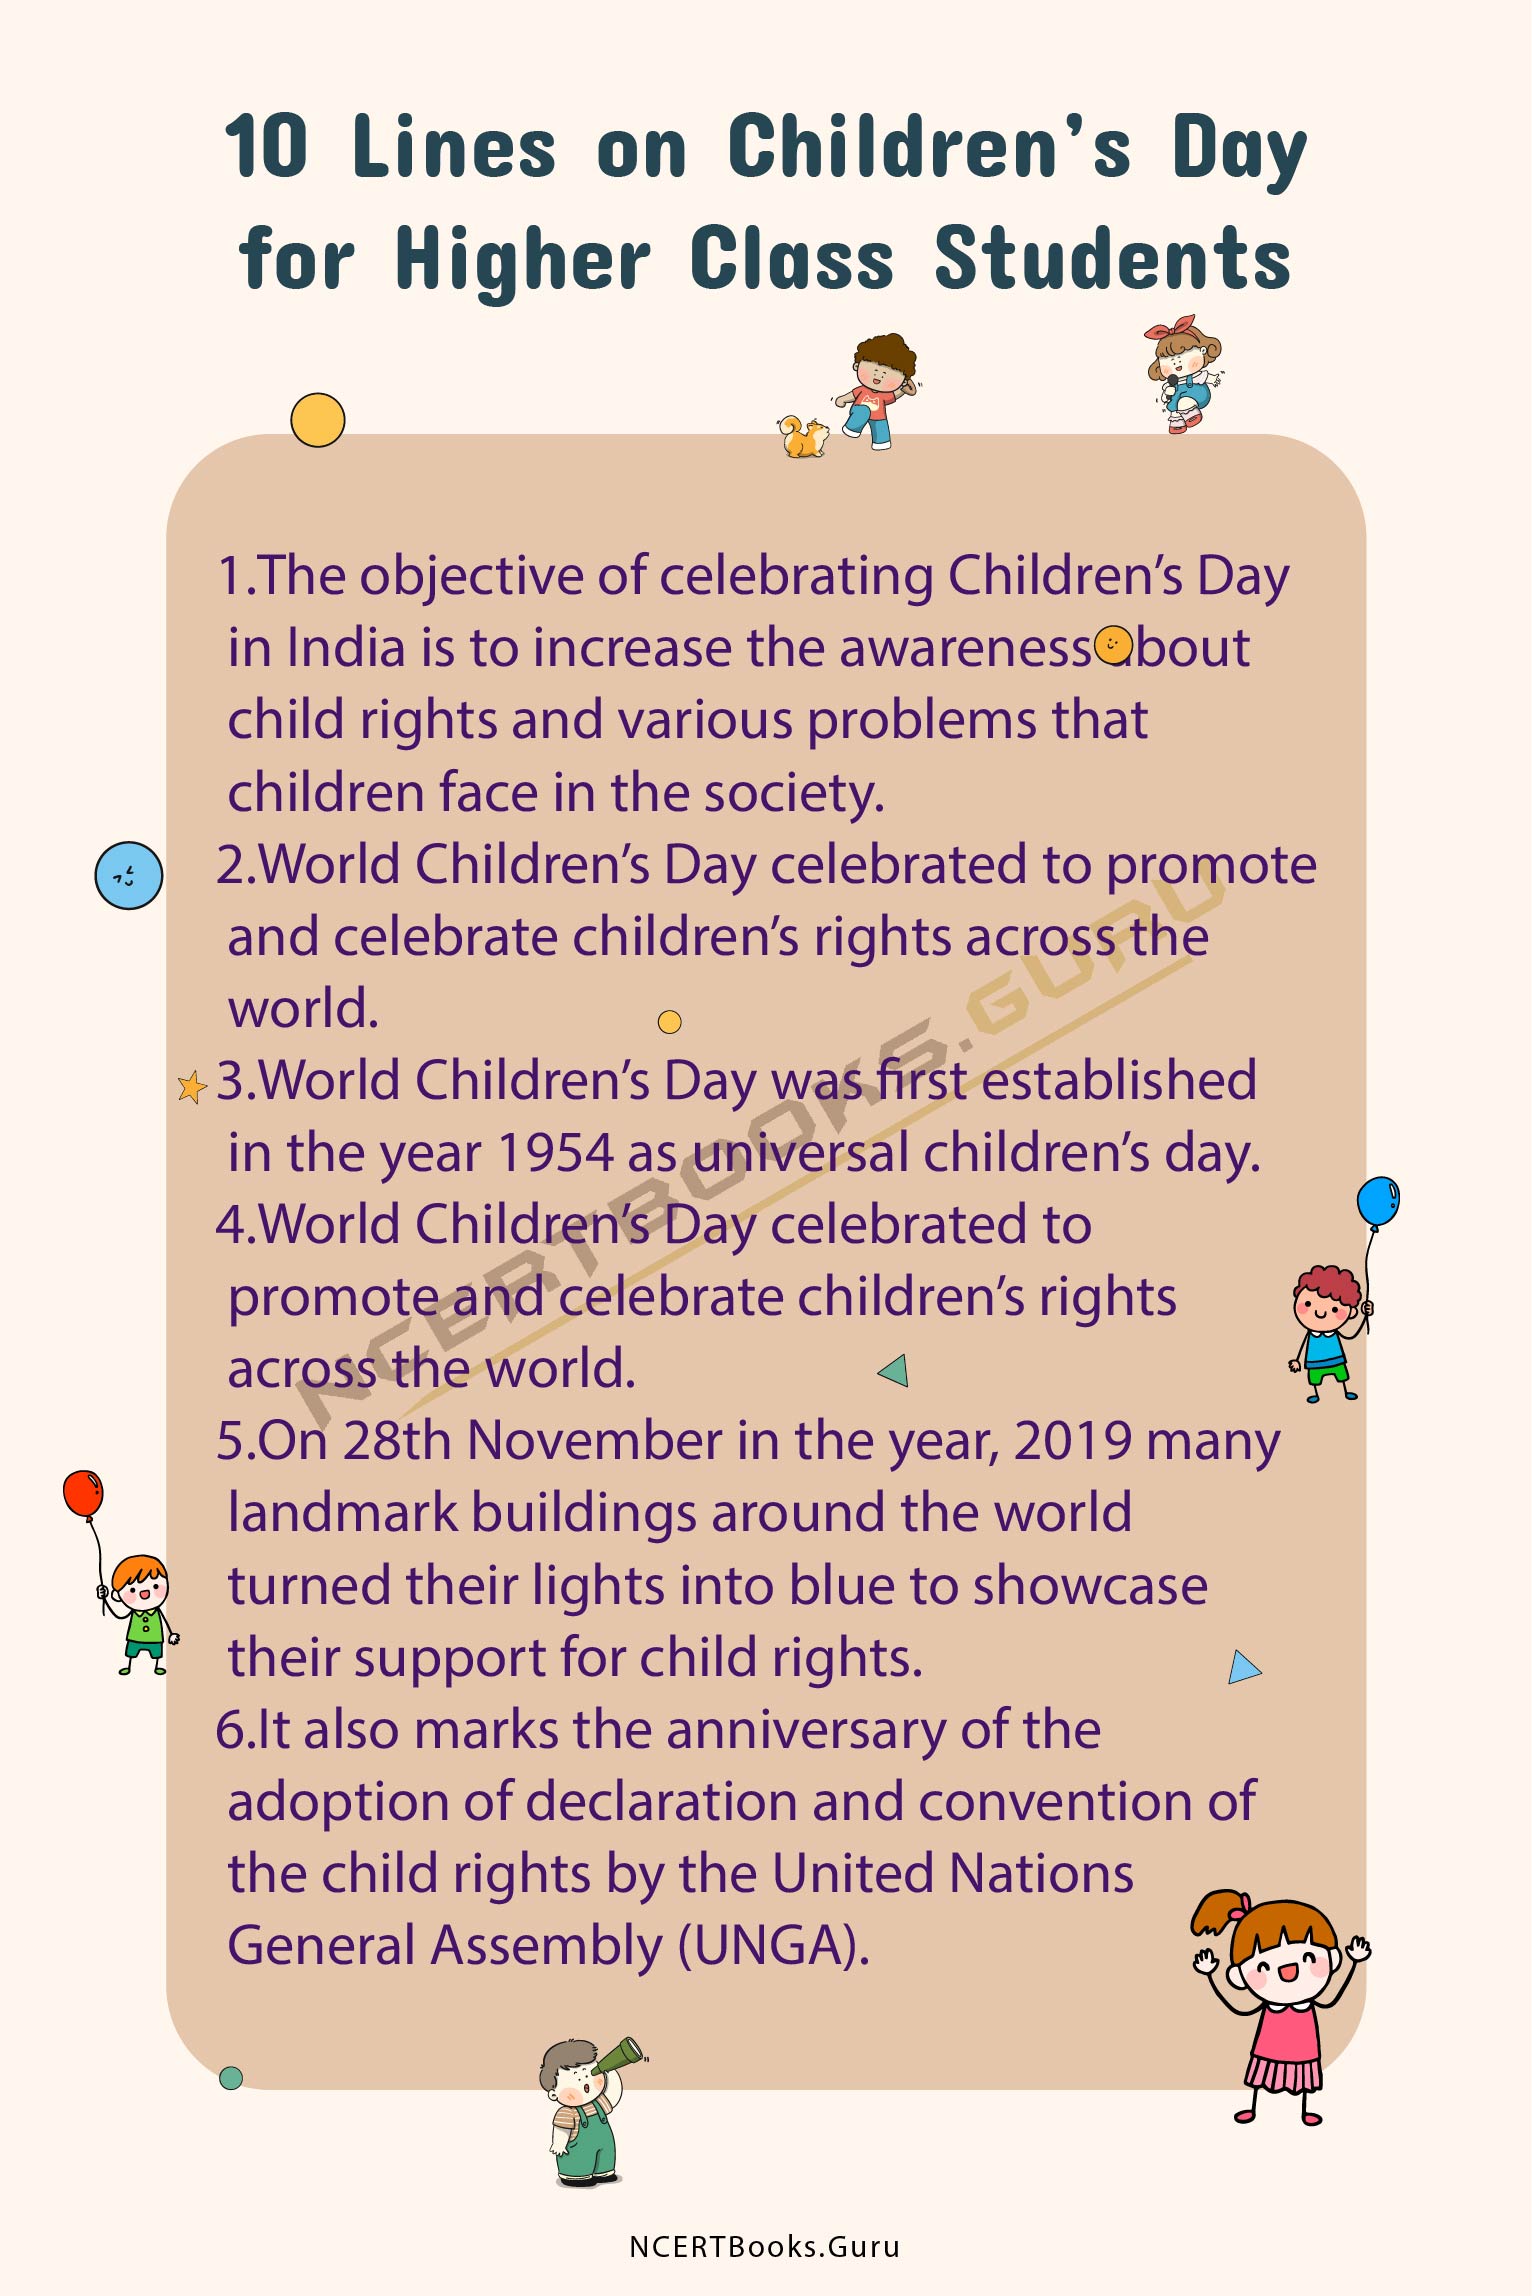 10 Lines on Children’s Day 2